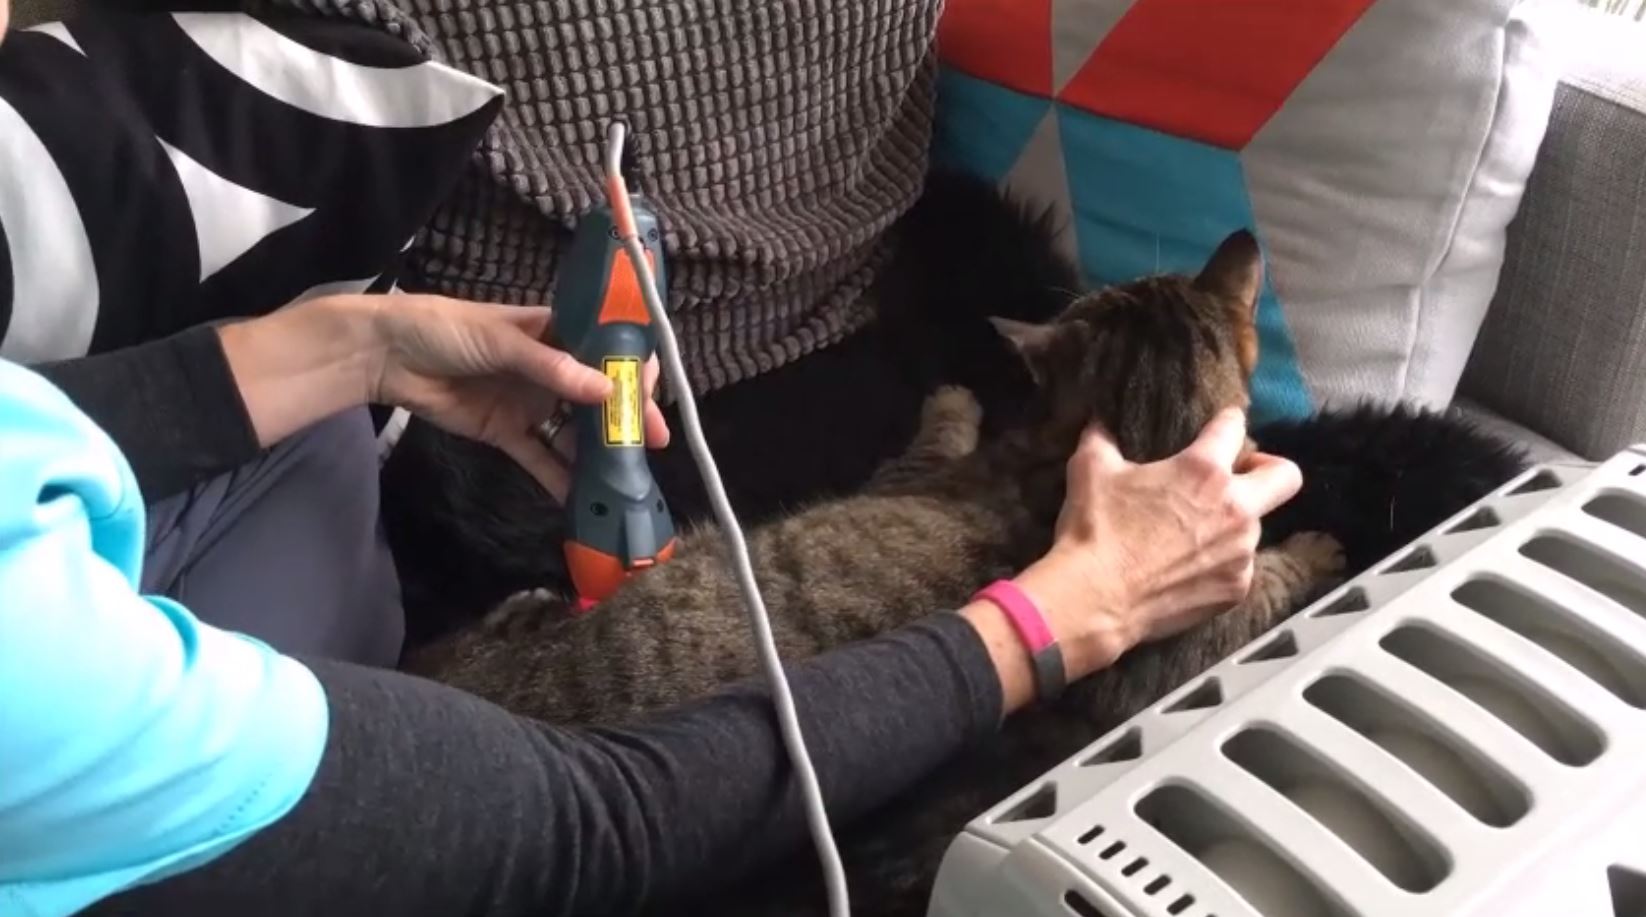 Burton the cat being treated with MLS Laser Therapy